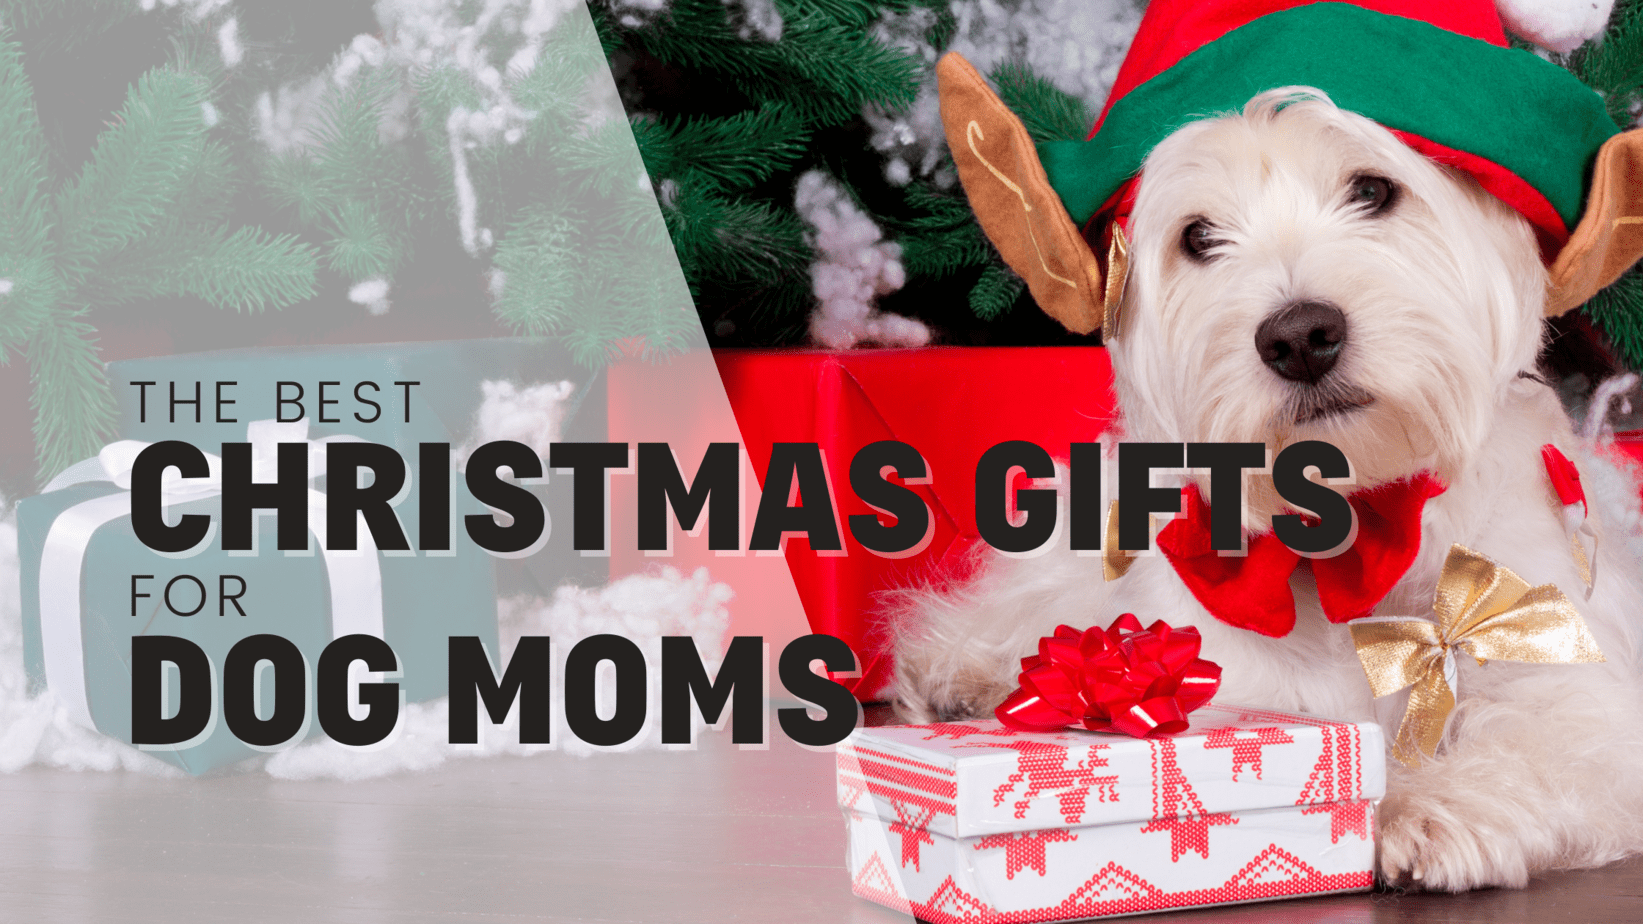 Best Christmas Gifts For Dog Moms!